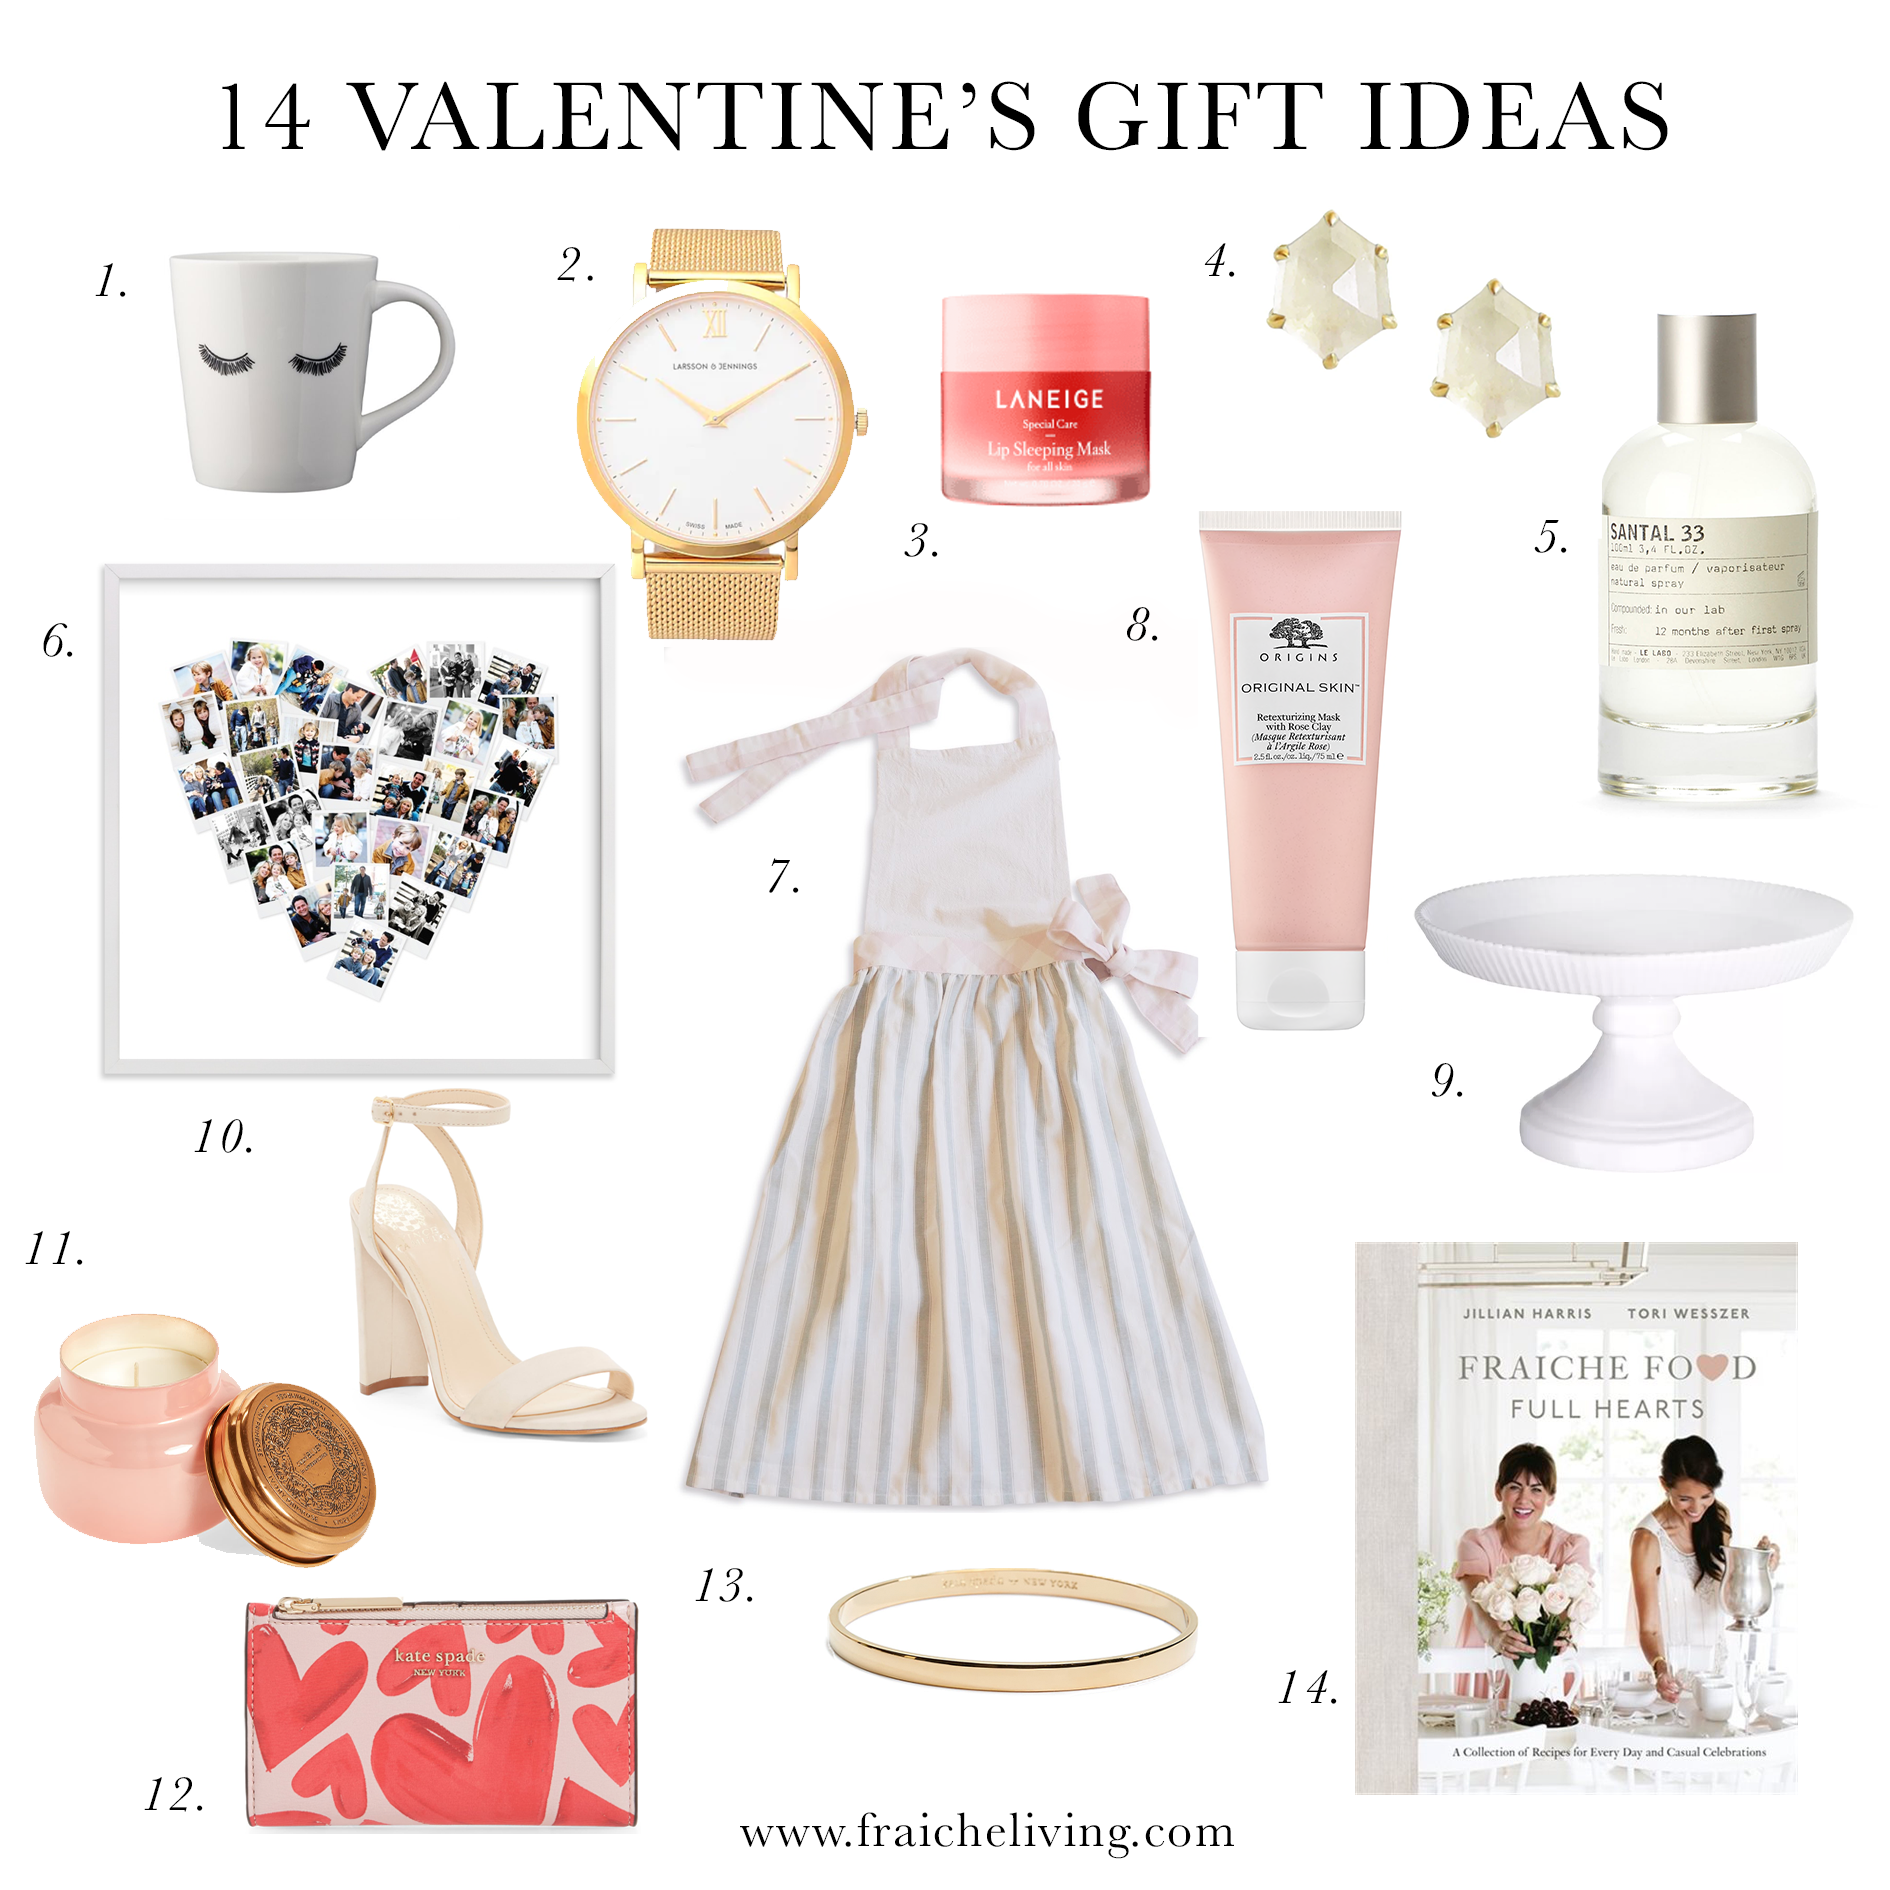 14 Valentine's gift ideas for her